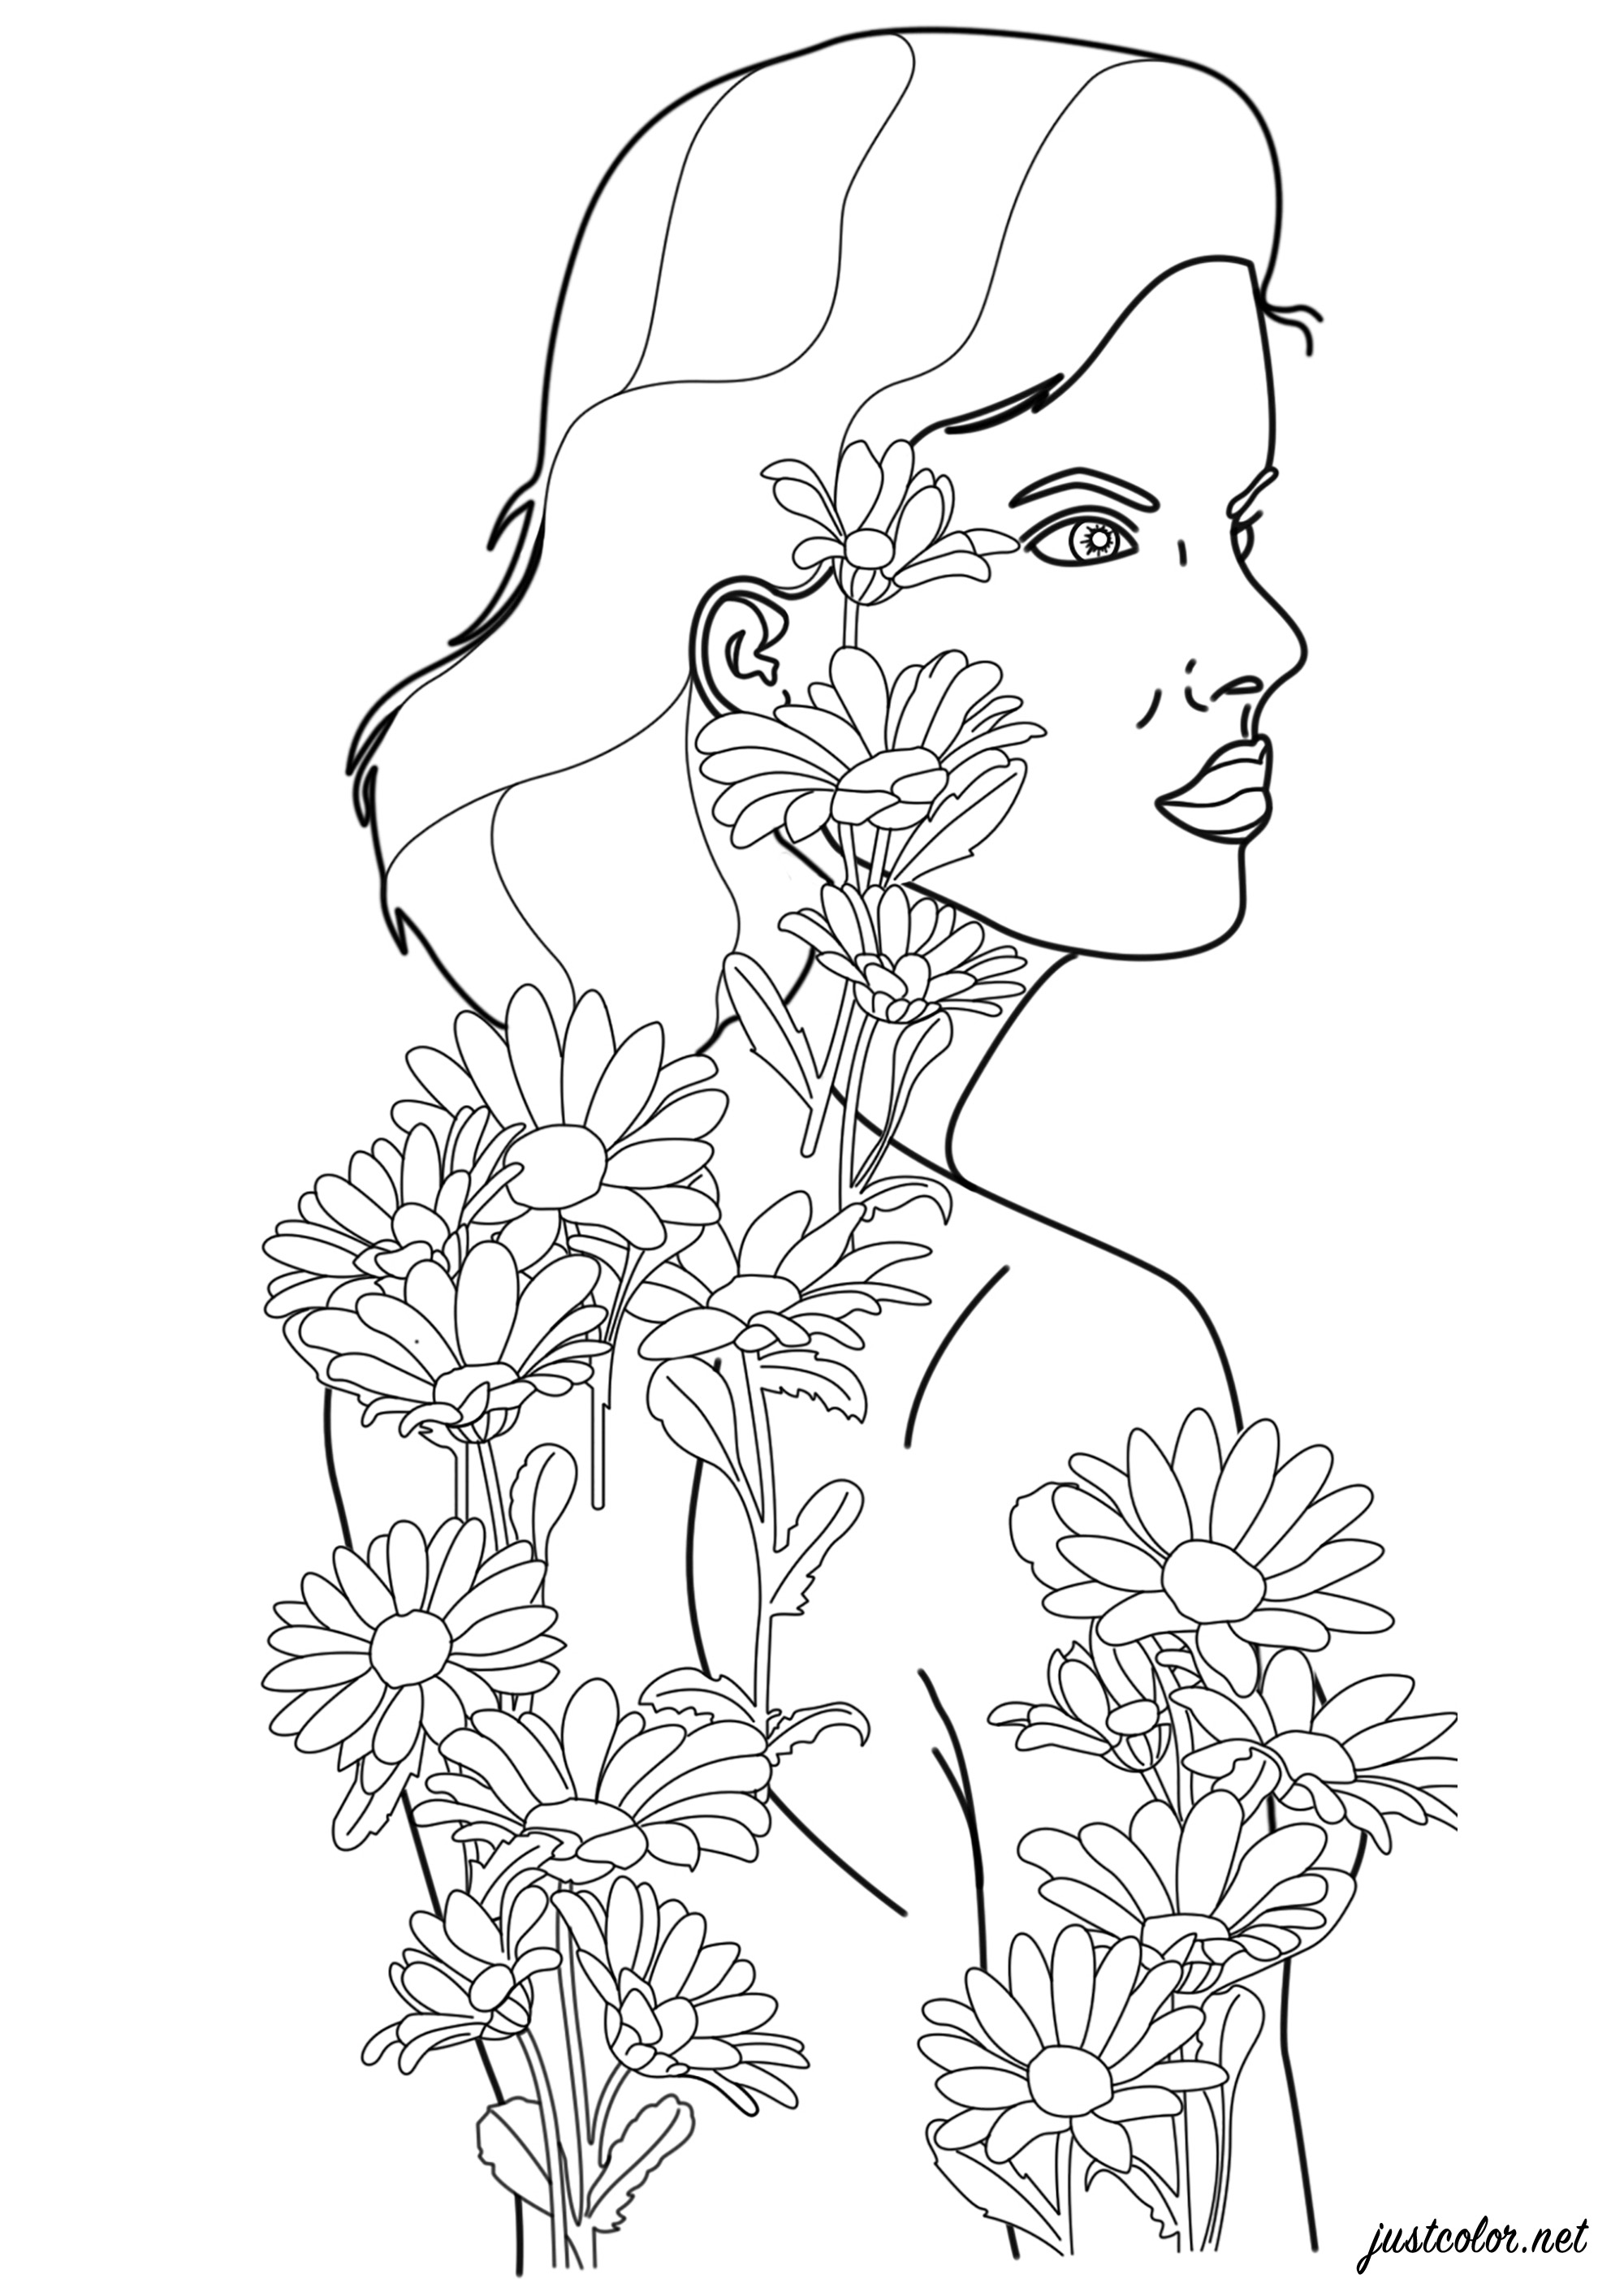 Woman with flower tattoos coming to life and becoming real